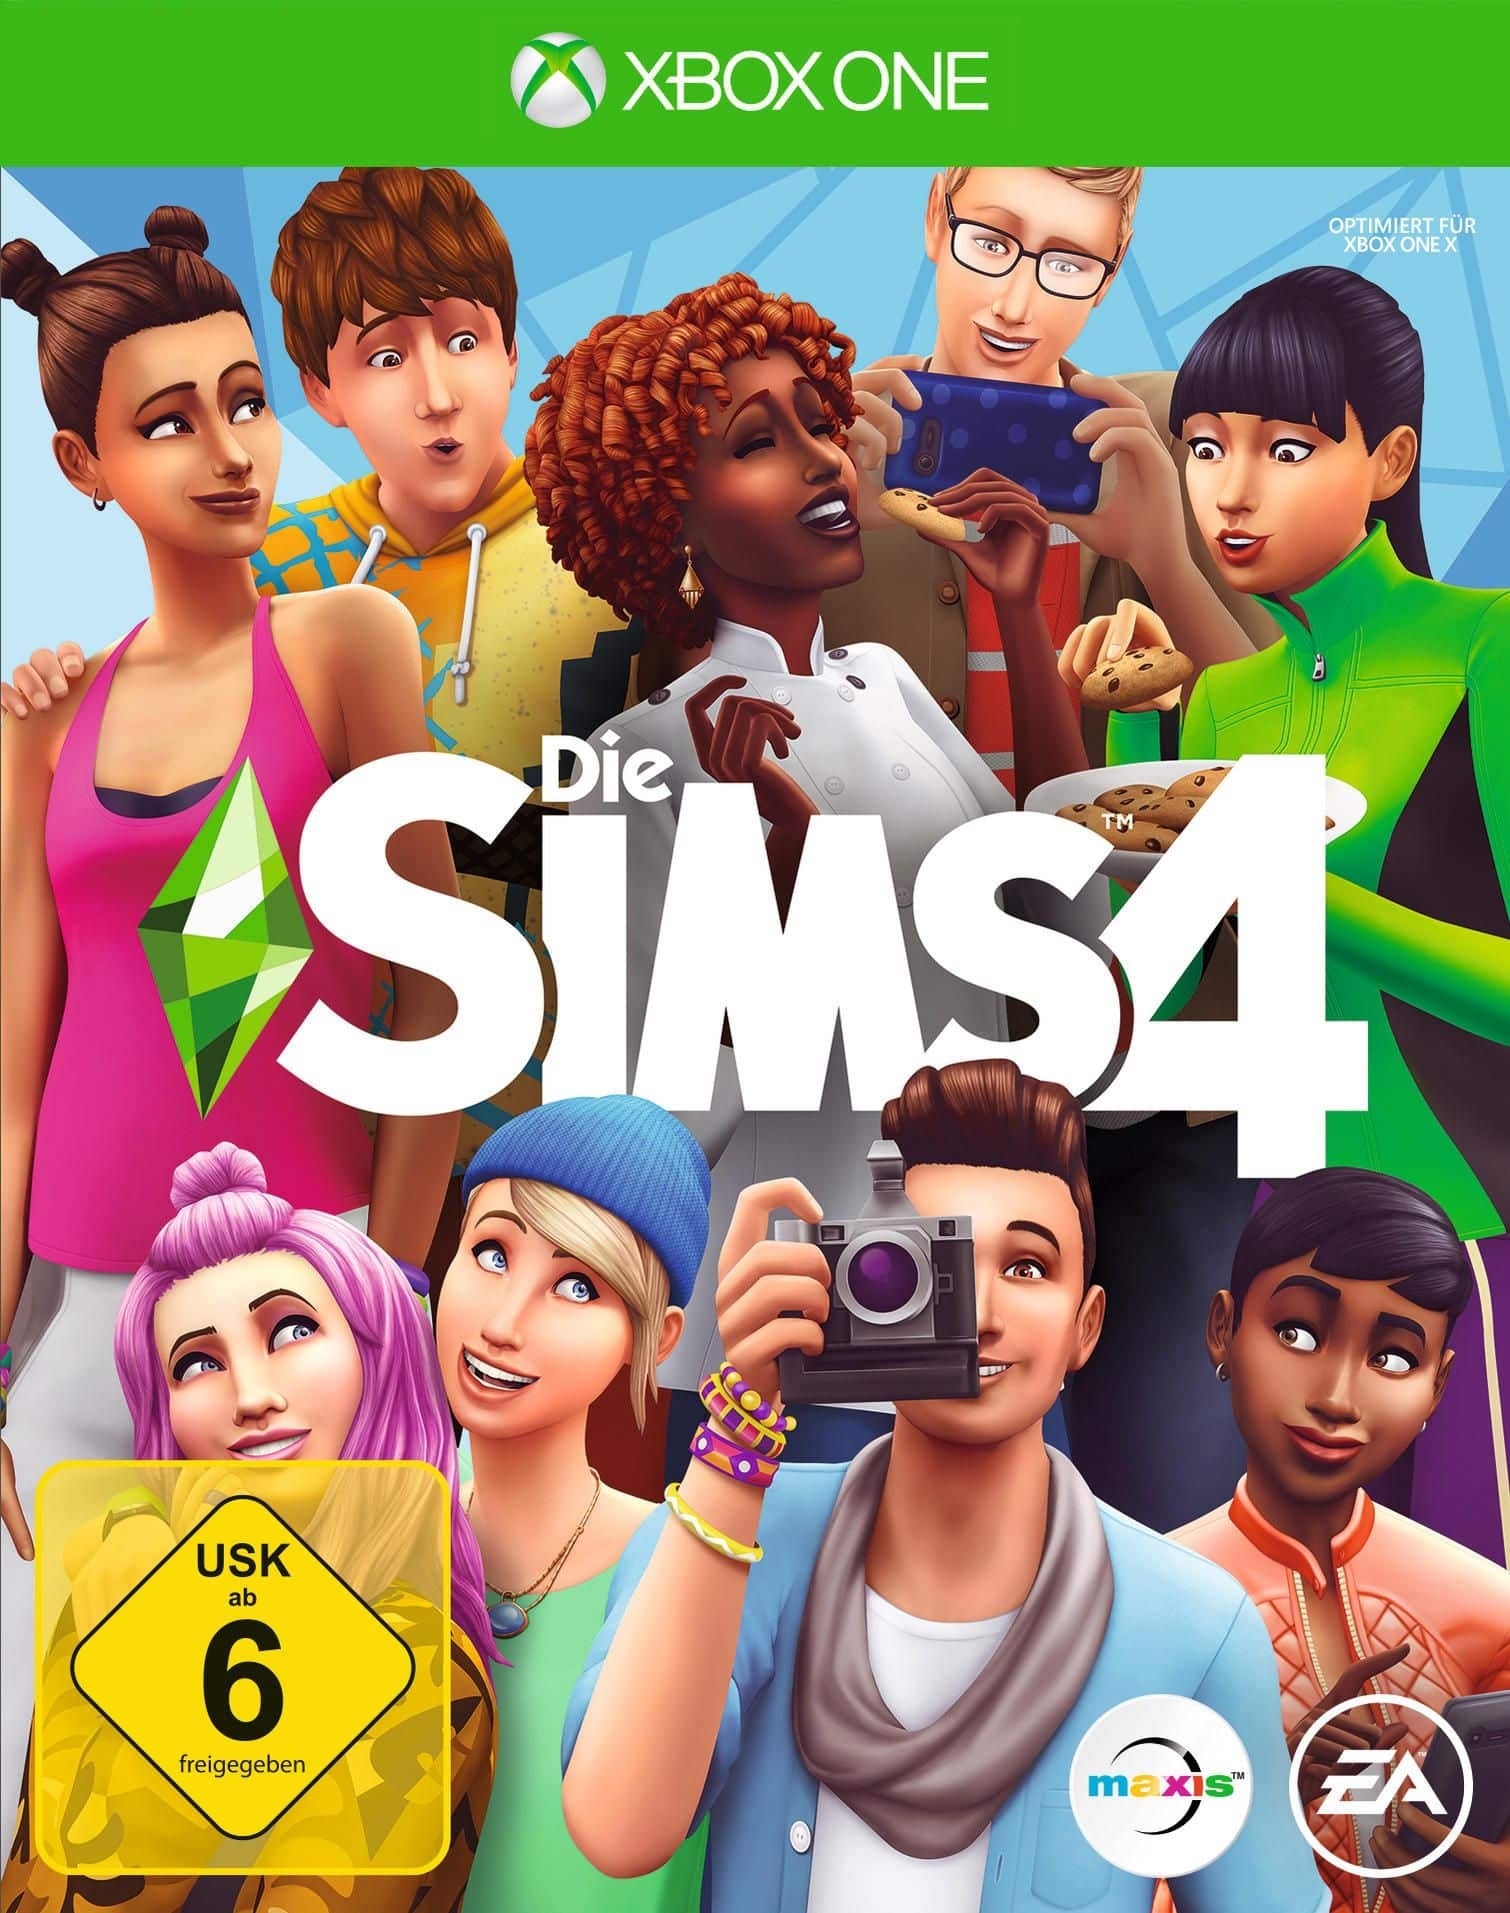 Die Sims 4 - Standard Edition (Xbox One)